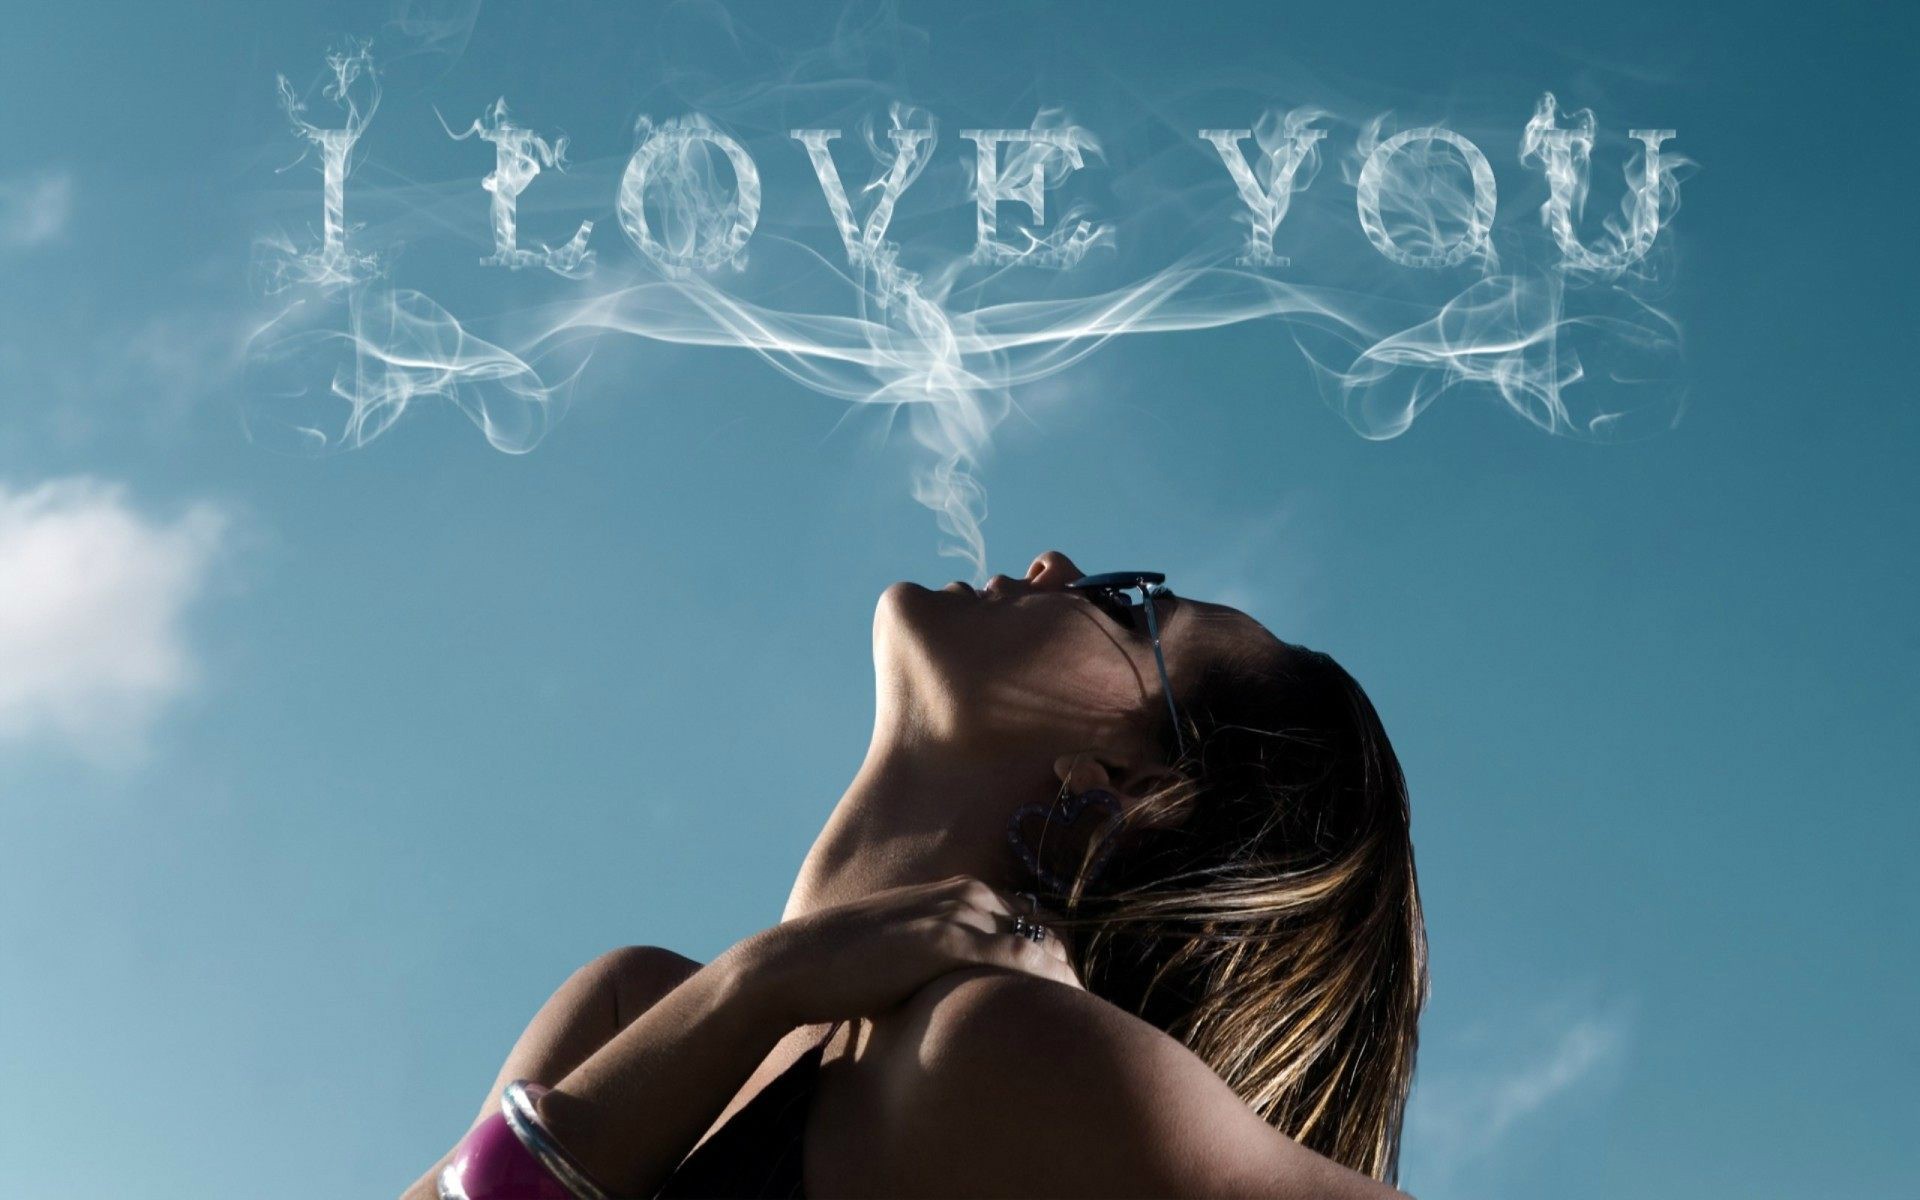 i love you girl art free awesome image for mobile